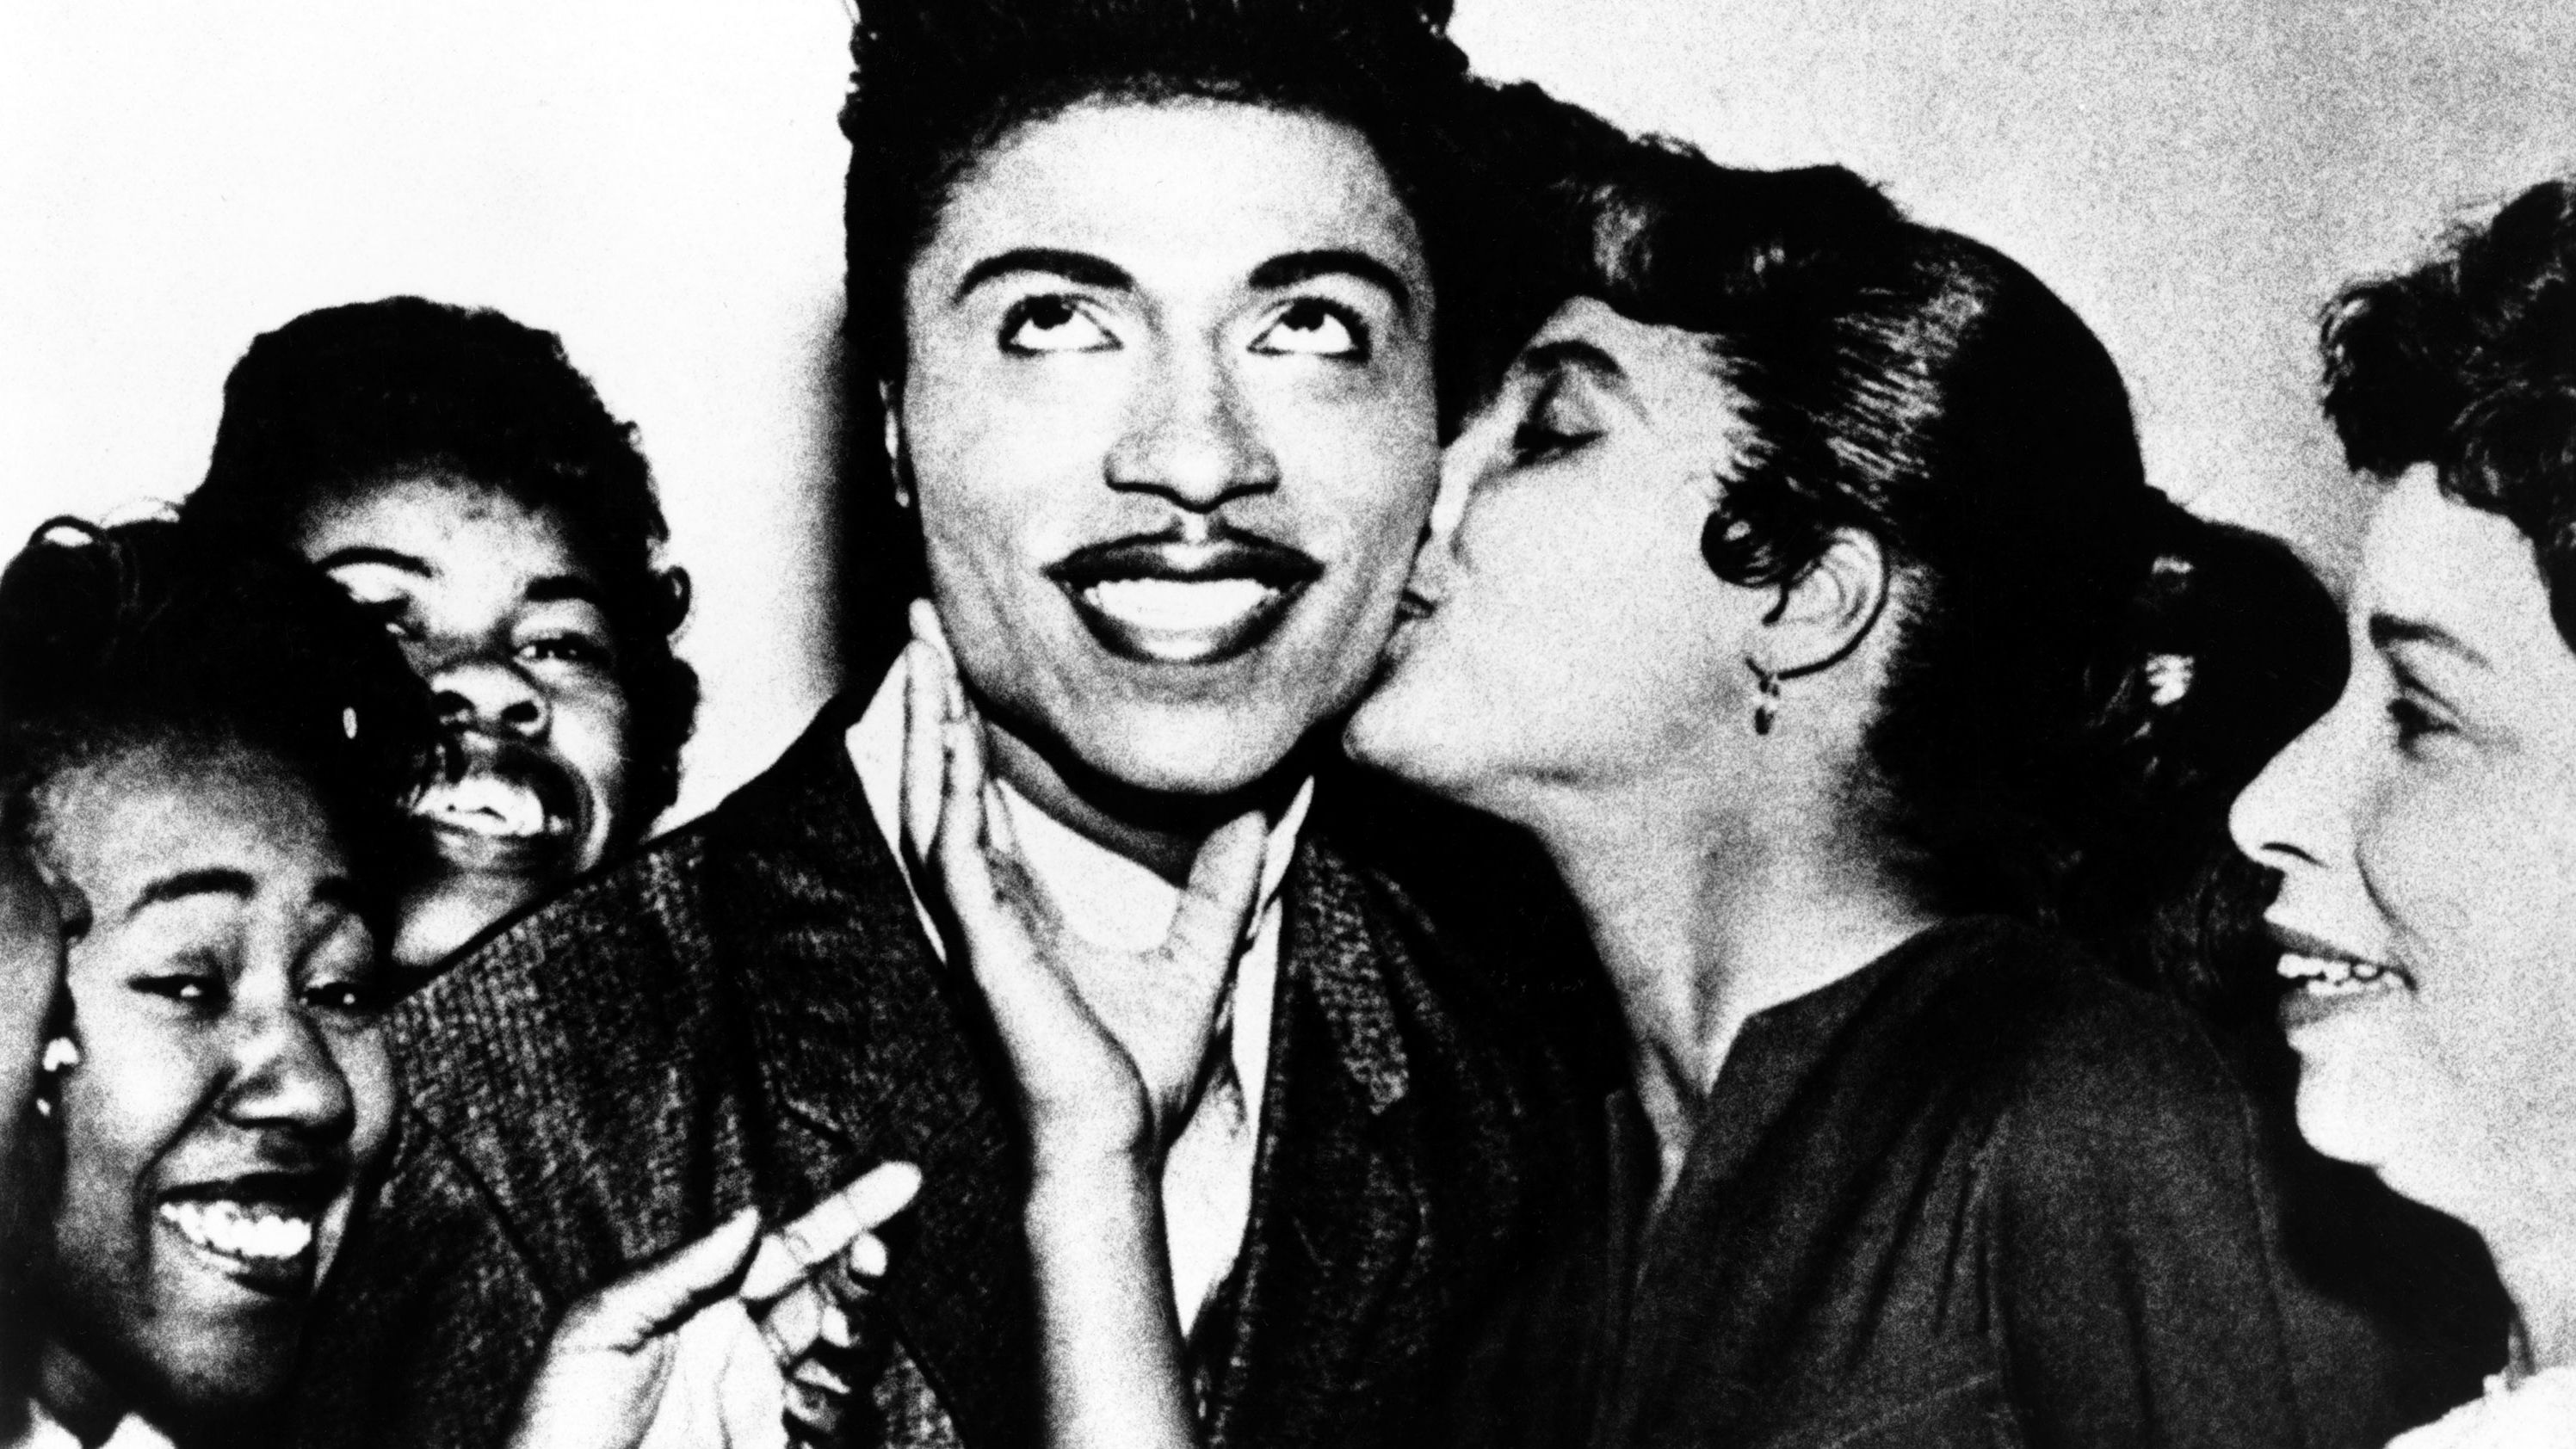 Little Richard visits with fans in the 1950s.